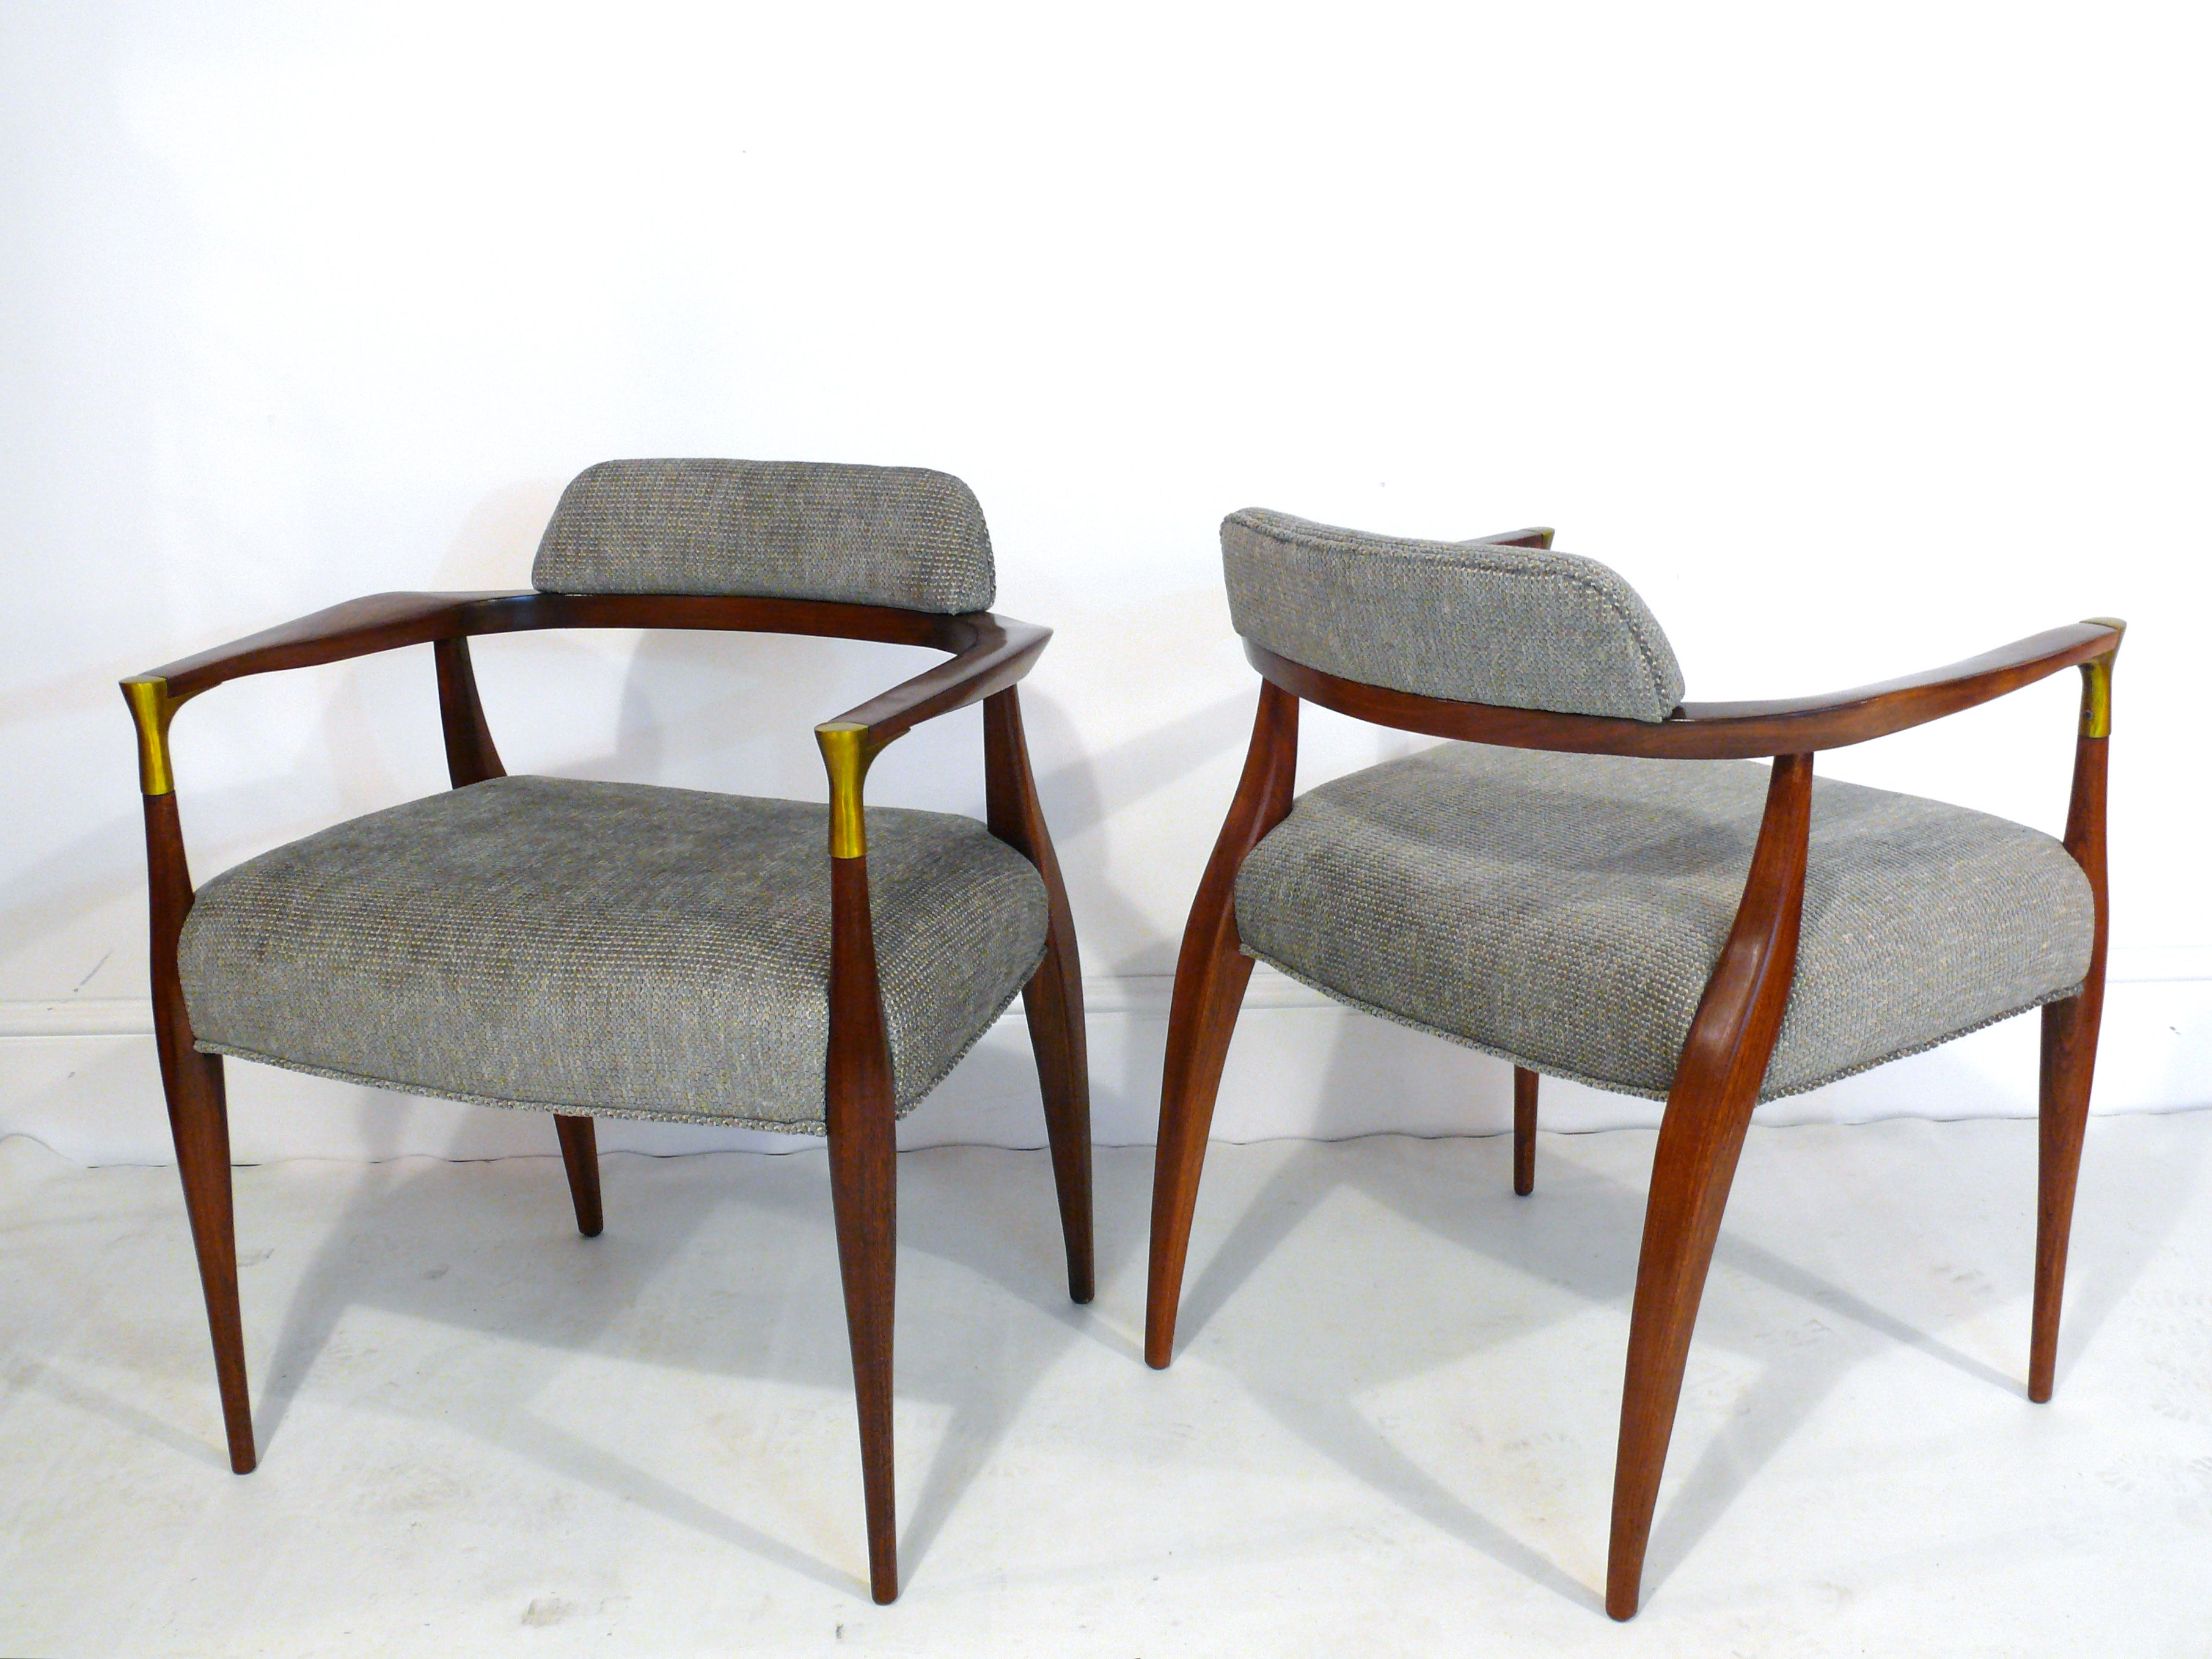 Set of Four Sculptural Chairs attributed to Bert England